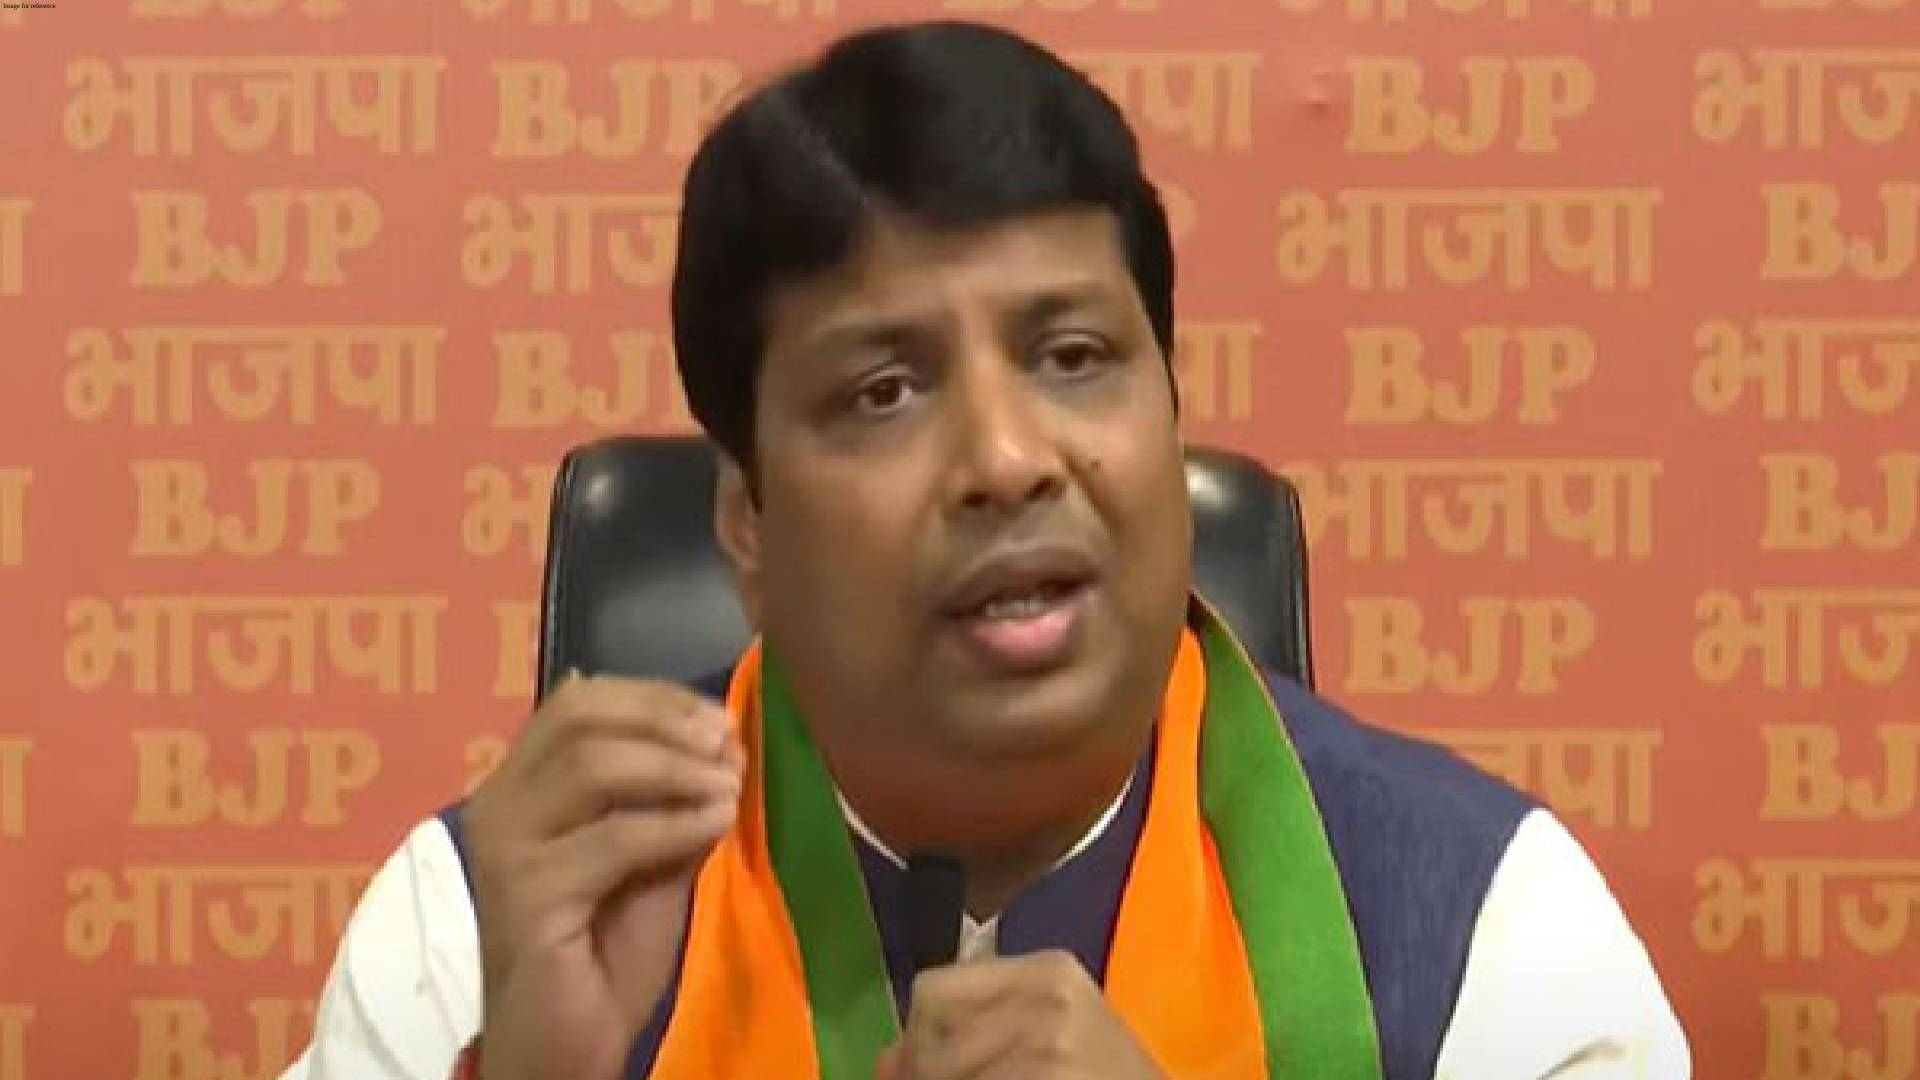 INDIA bloc named after country has anti-national elements: Ex-Congress leader Rohan Gupta as he joins BJP